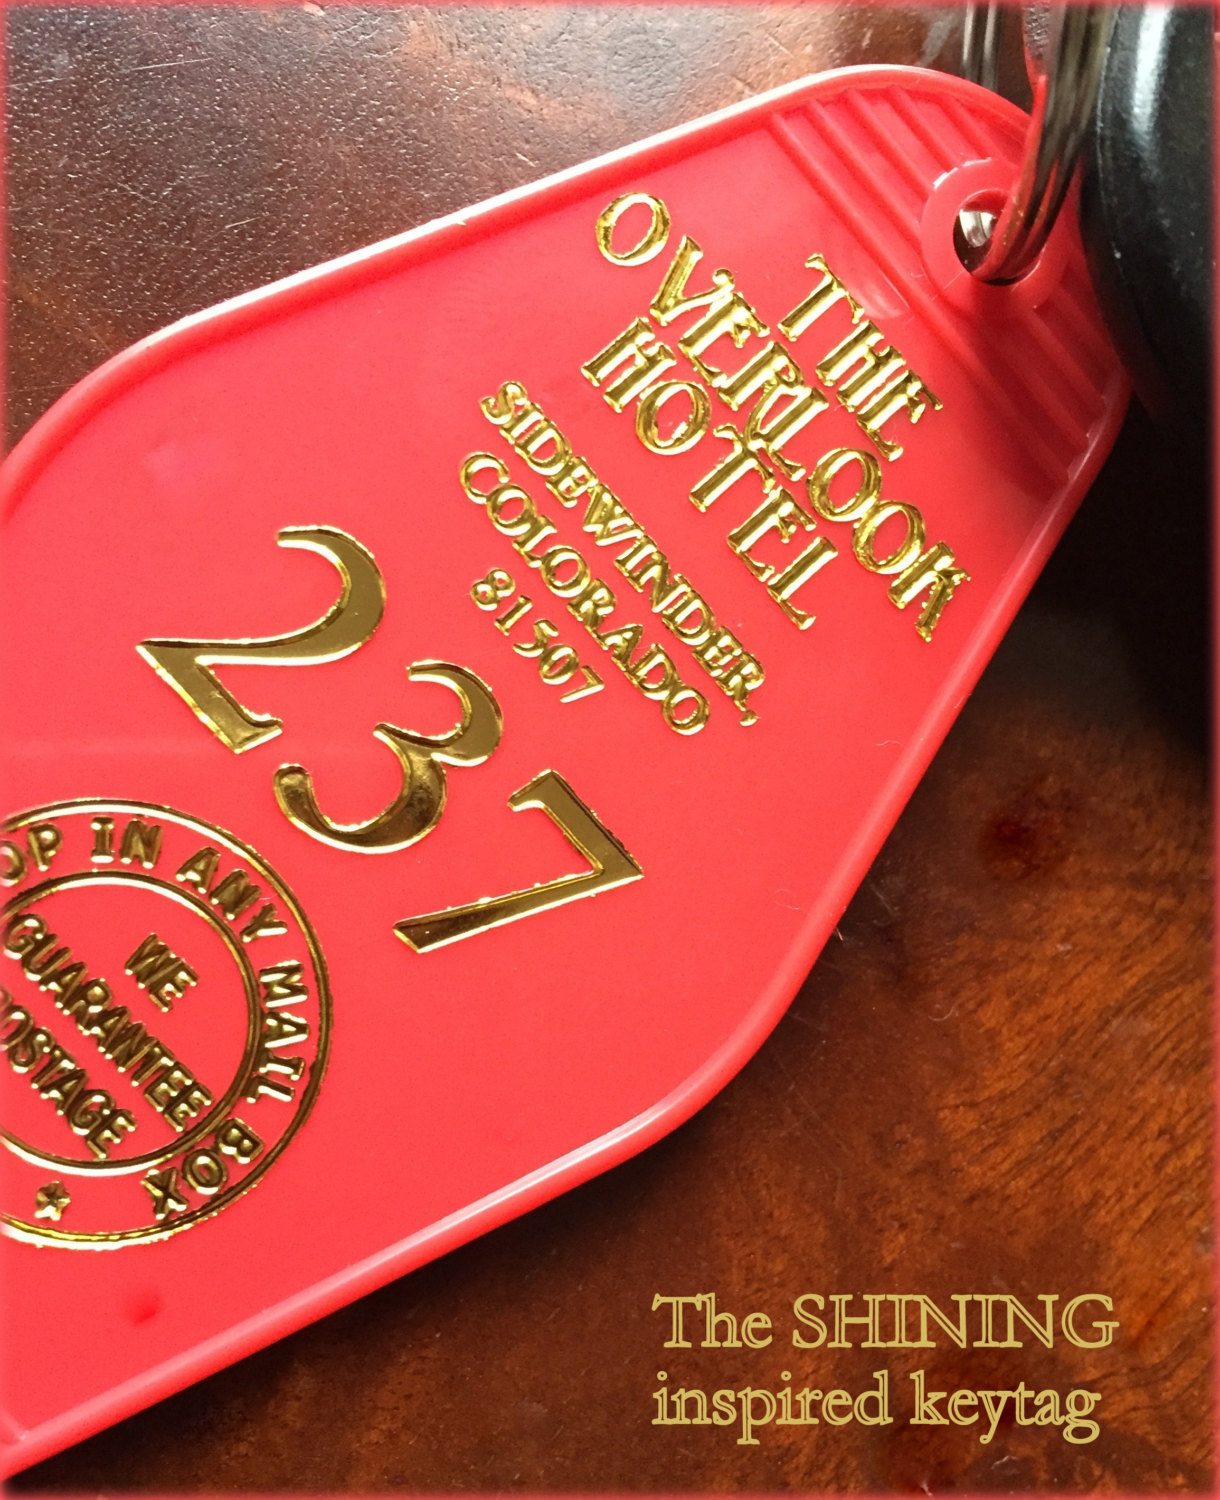 On Sale The Shining Overlook Hotel Room 237 And 50 Similar